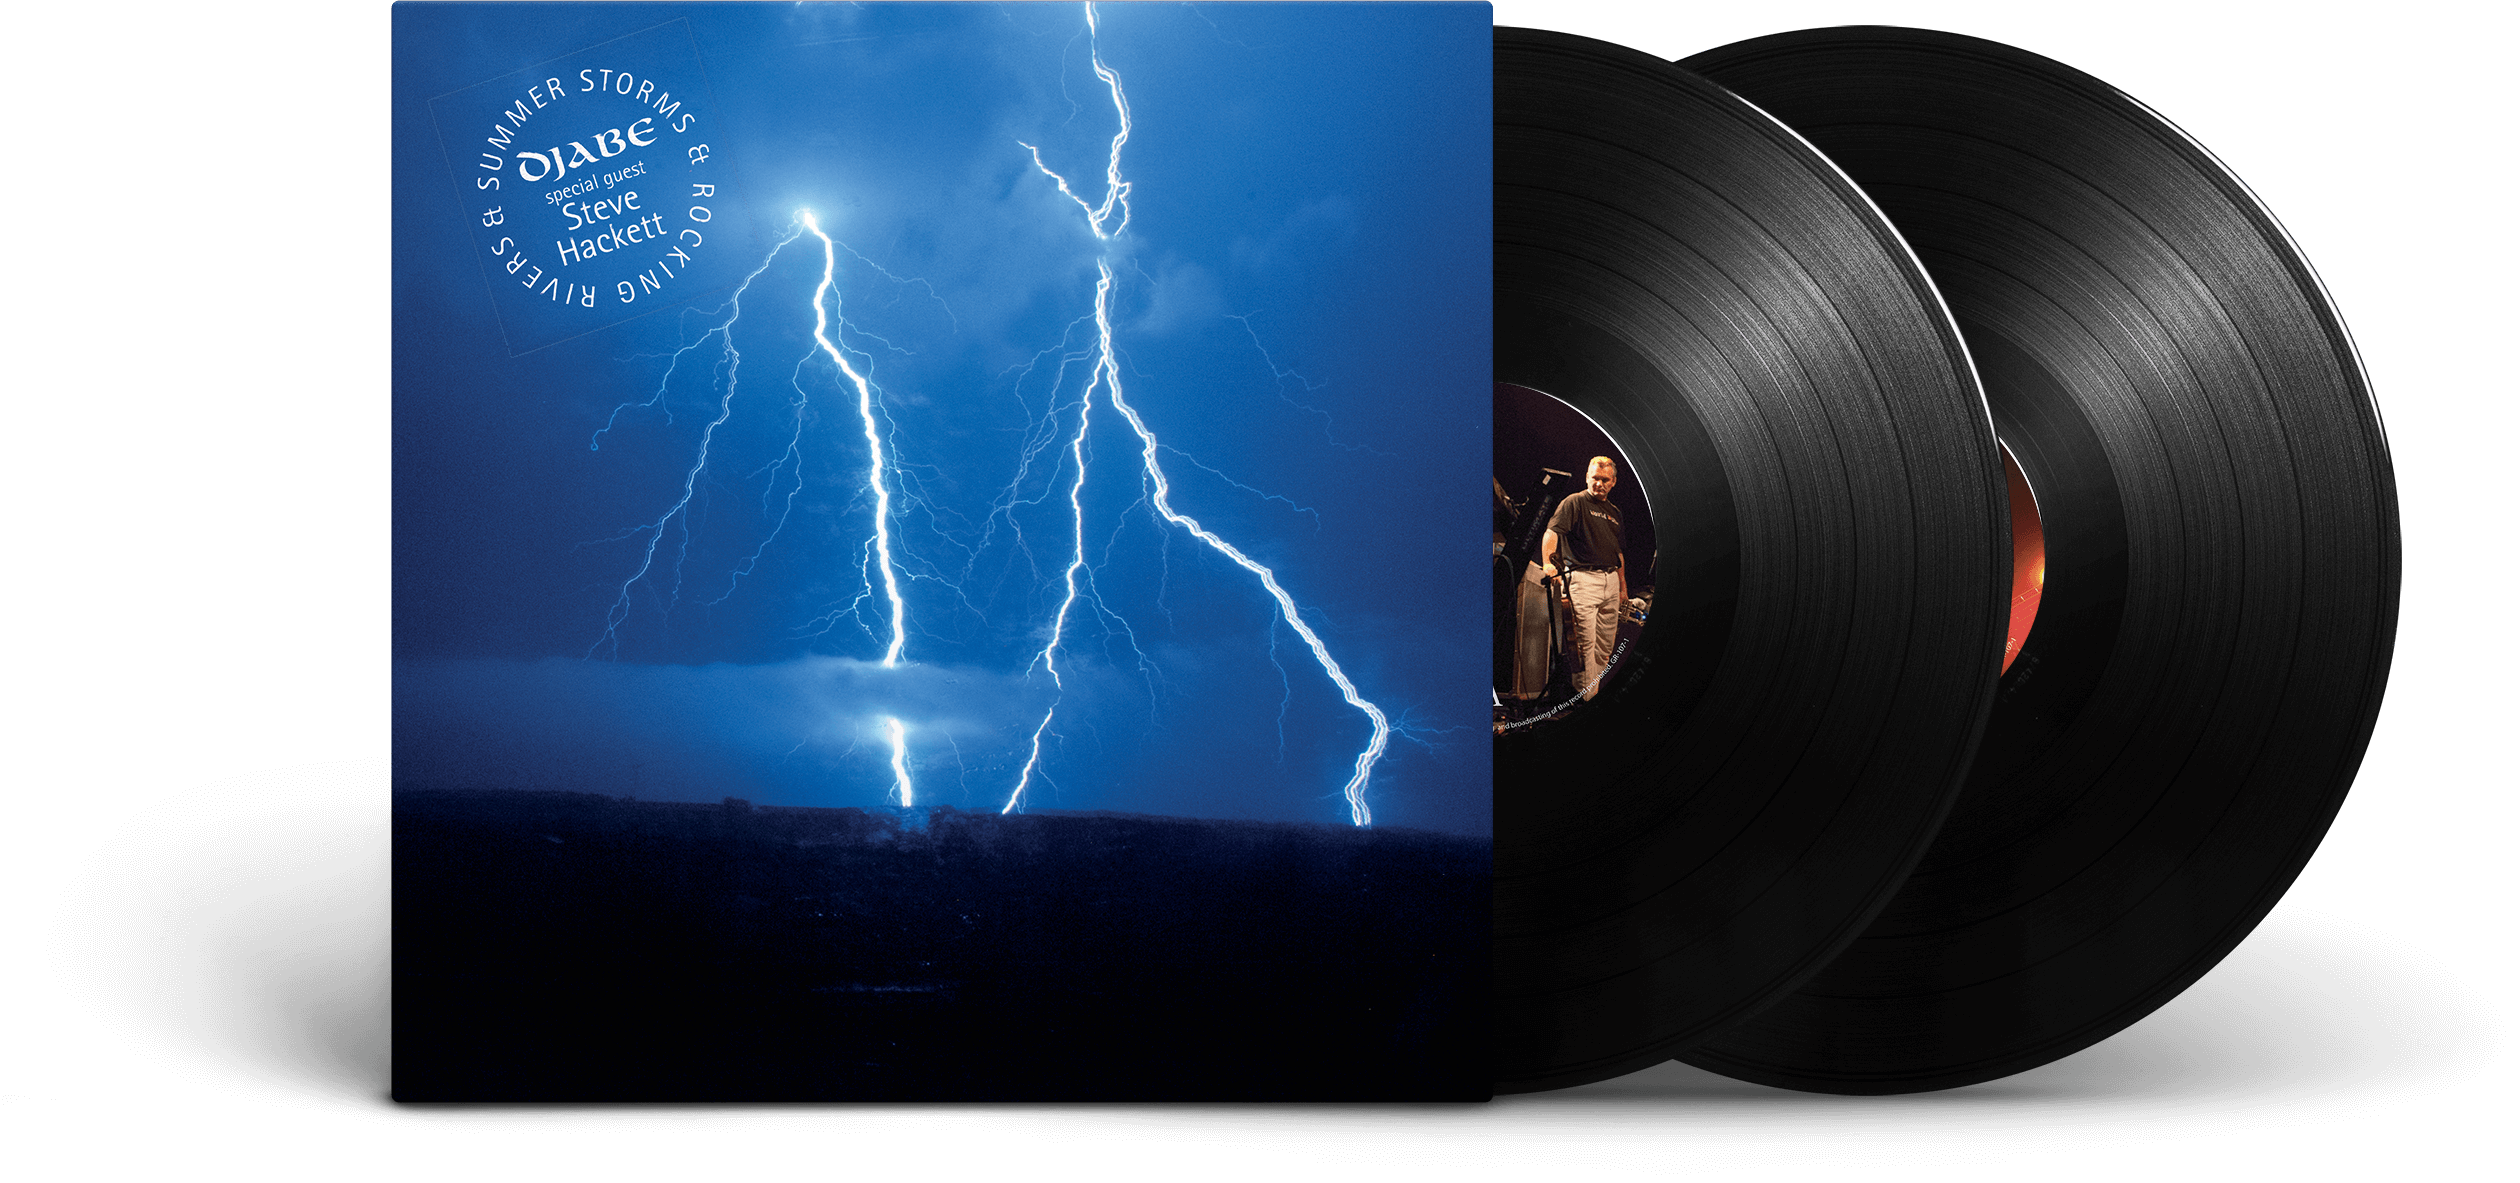 Djabe special guest Steve Hackett – Summer Storms and Rocking Rivers (2LP)